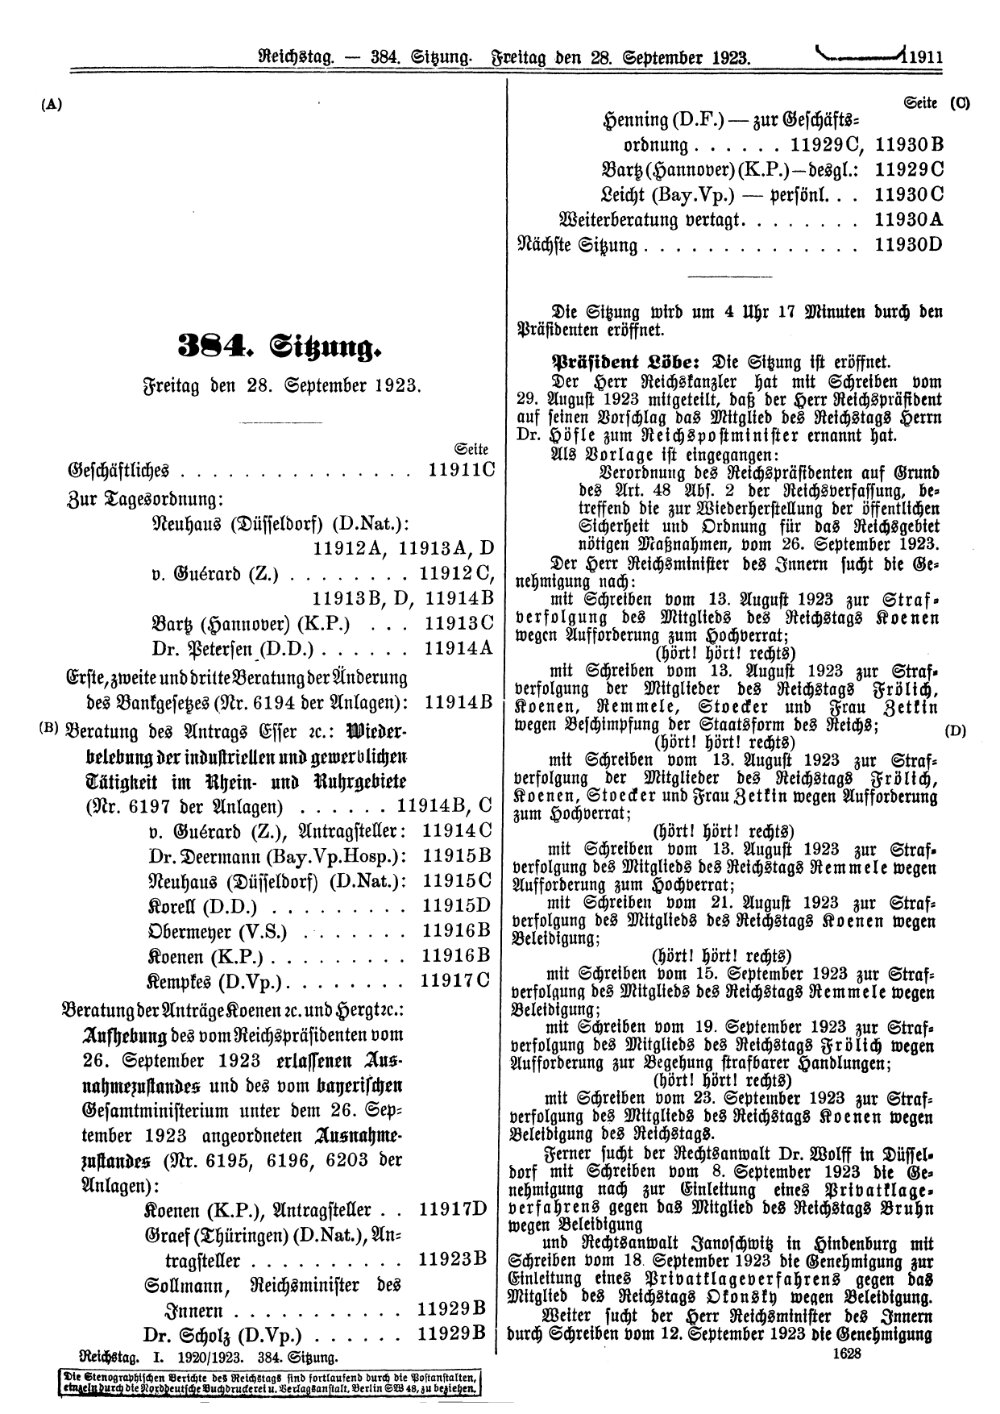 Scan of page 11911